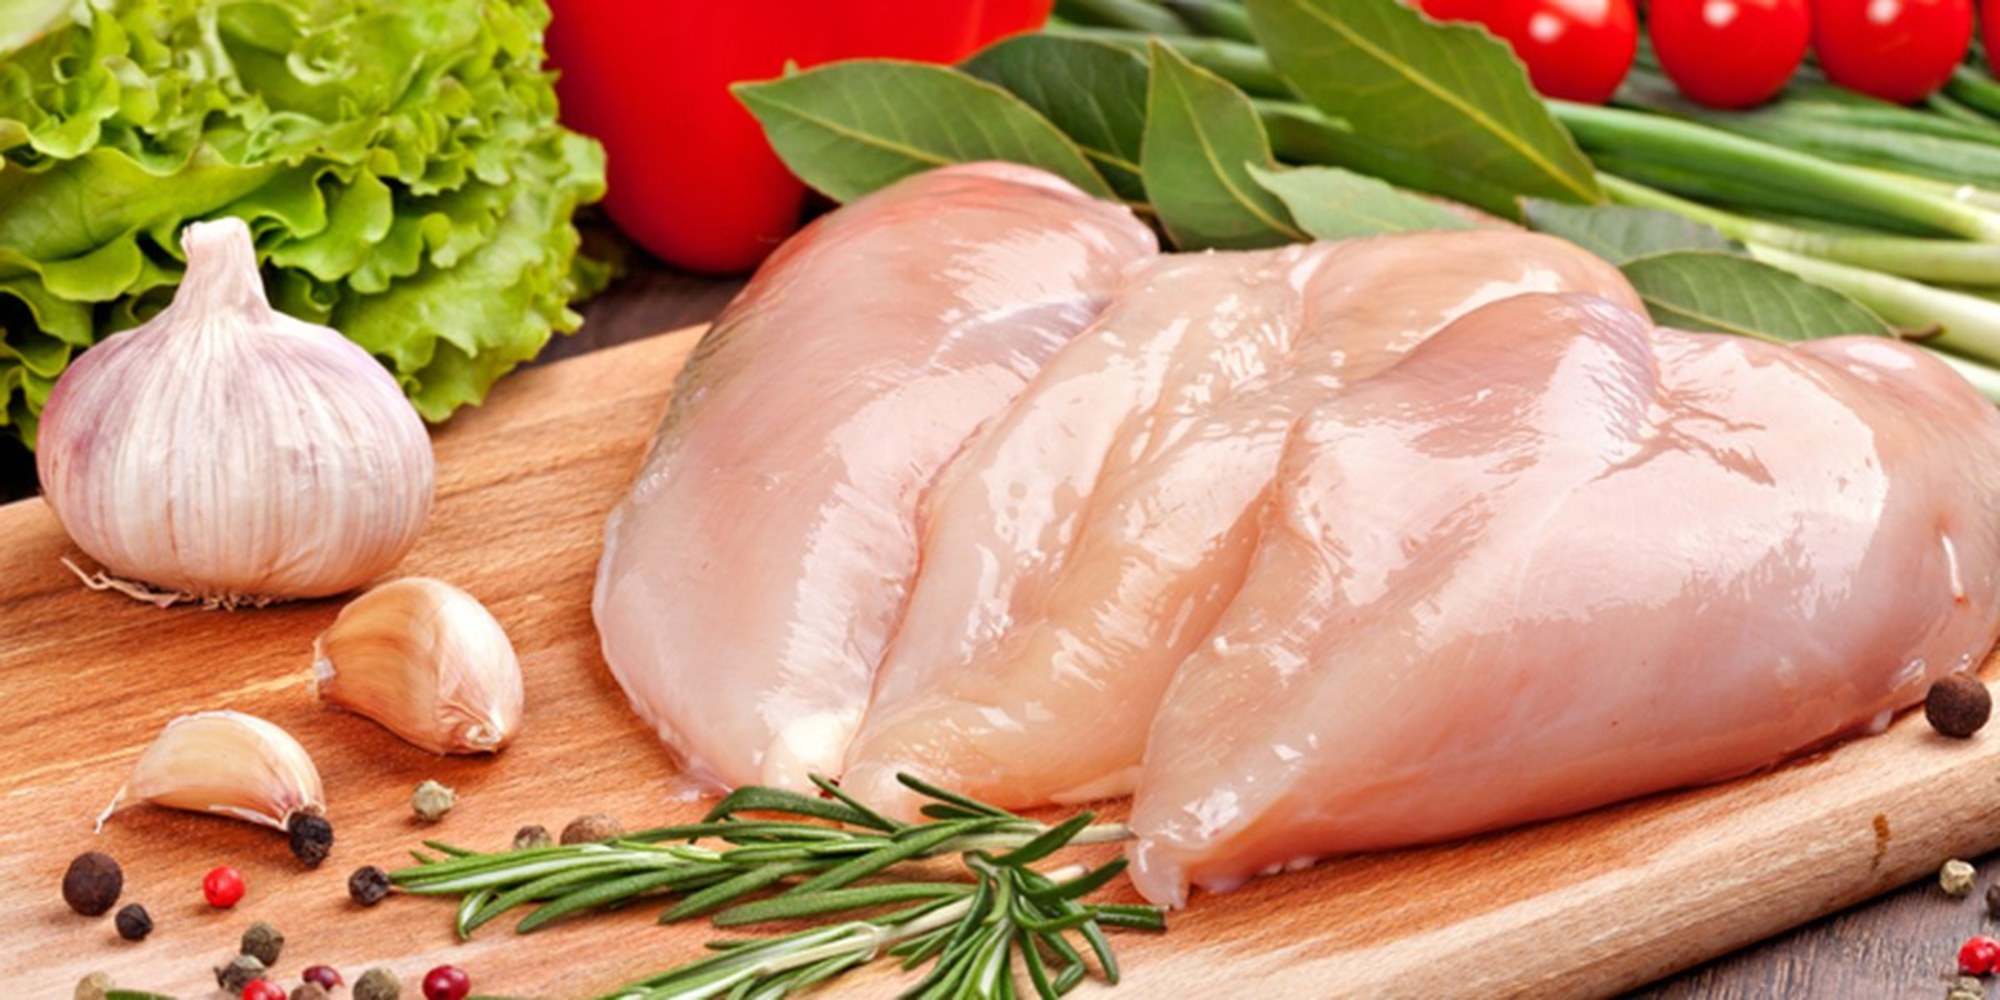 In 2013, farms across the US produced 38 billion pounds of chicken meat, co...